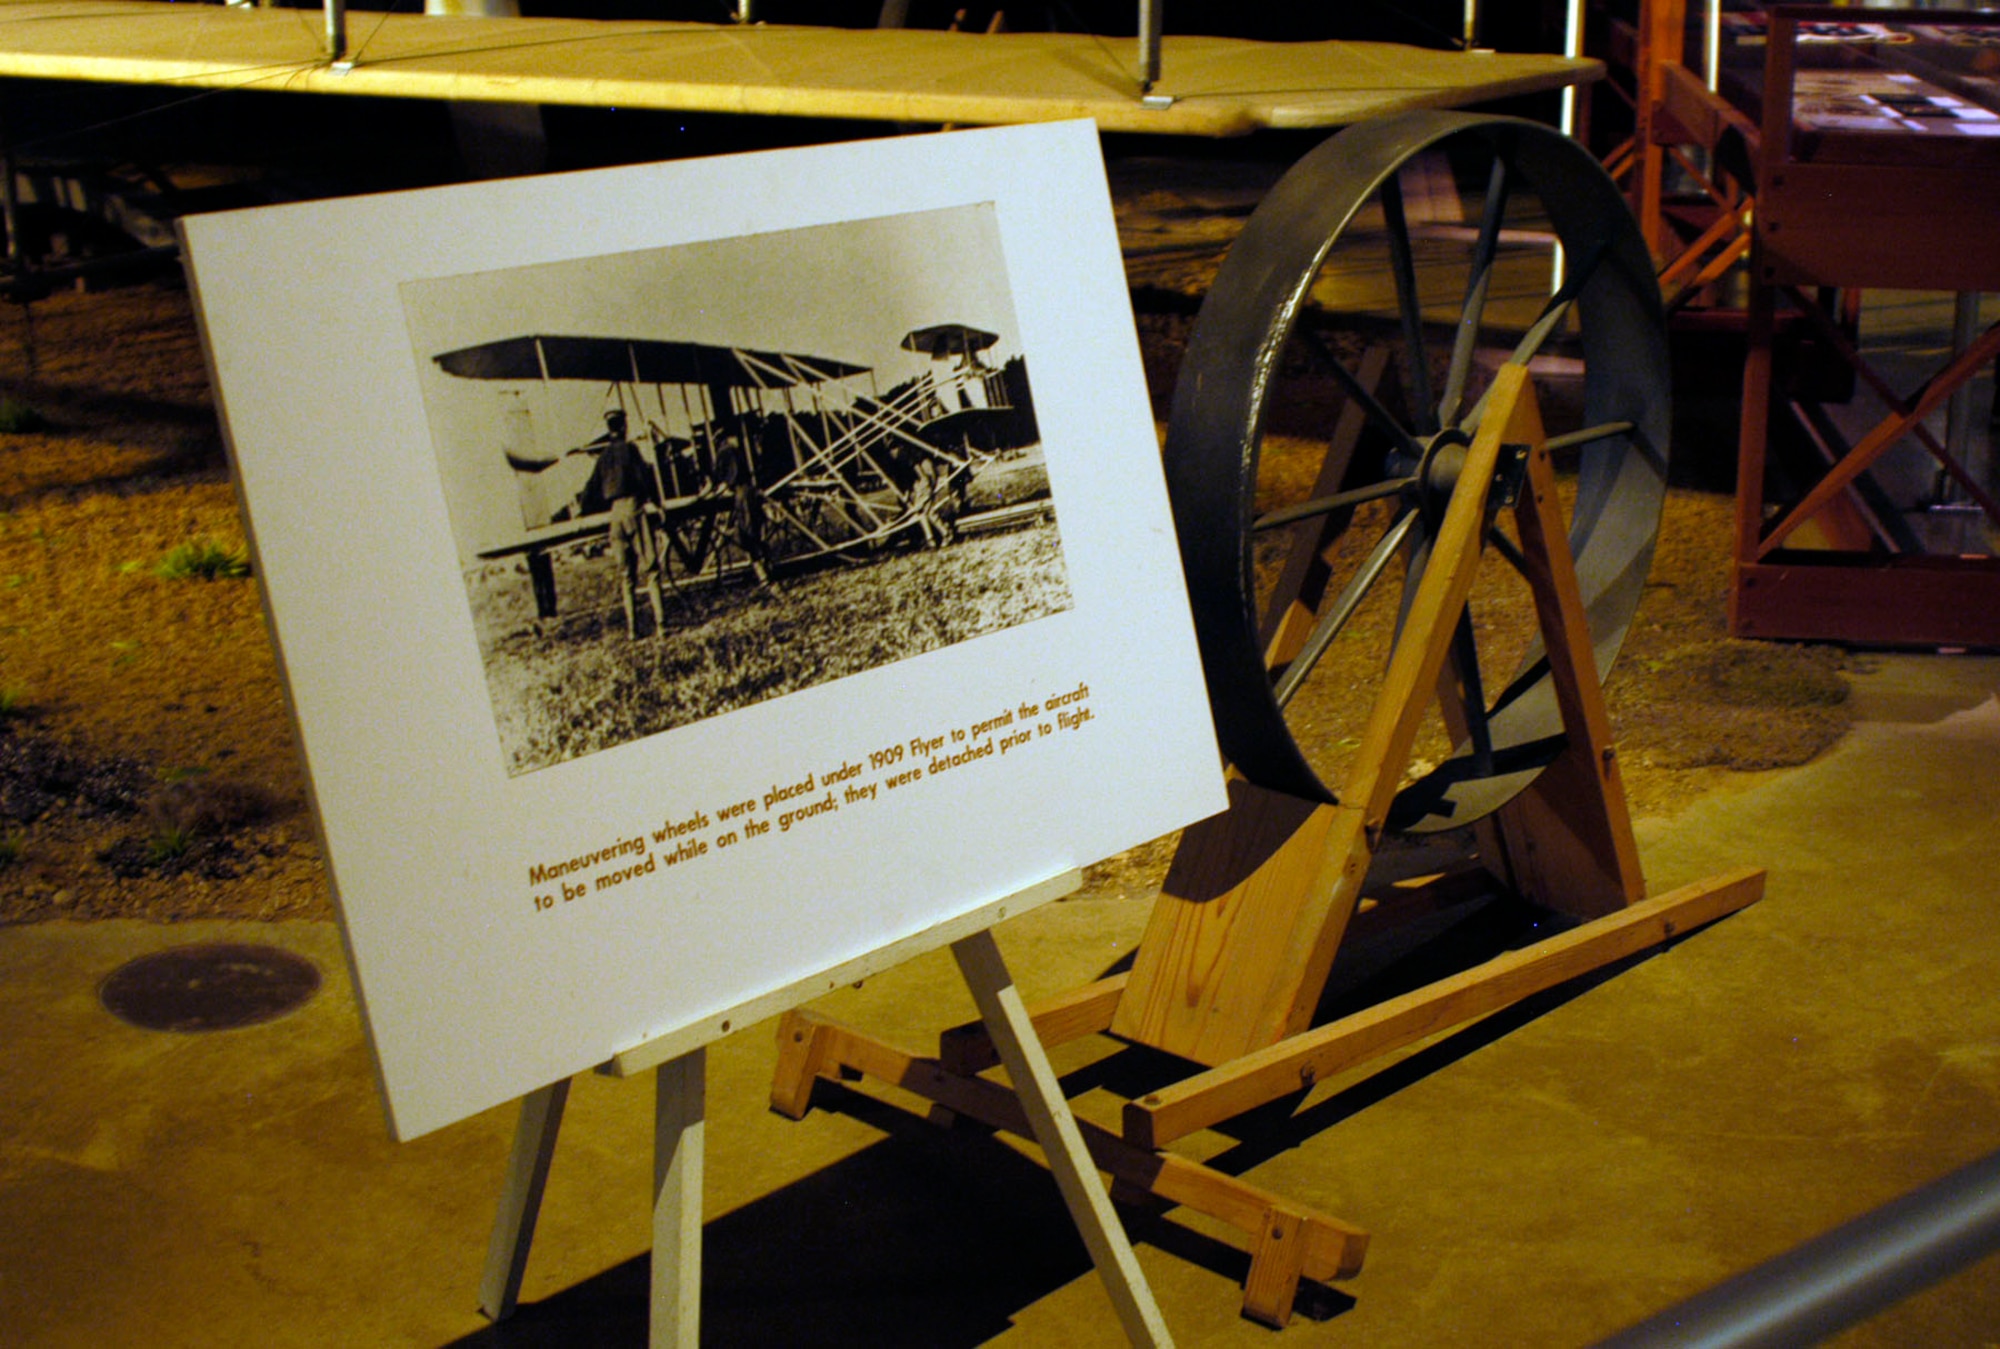 DAYTON, Ohio -- Maneuvering wheels on display near the Wright 1909 Military Flyer in the Early Years Gallery at the National Museum of the United States Air Force. Maneuvering wheels were placed under the 1909 Flyer to permit the aircraft to be moved while on the ground. They were detached prior to flight. (U.S. Air Force photo)